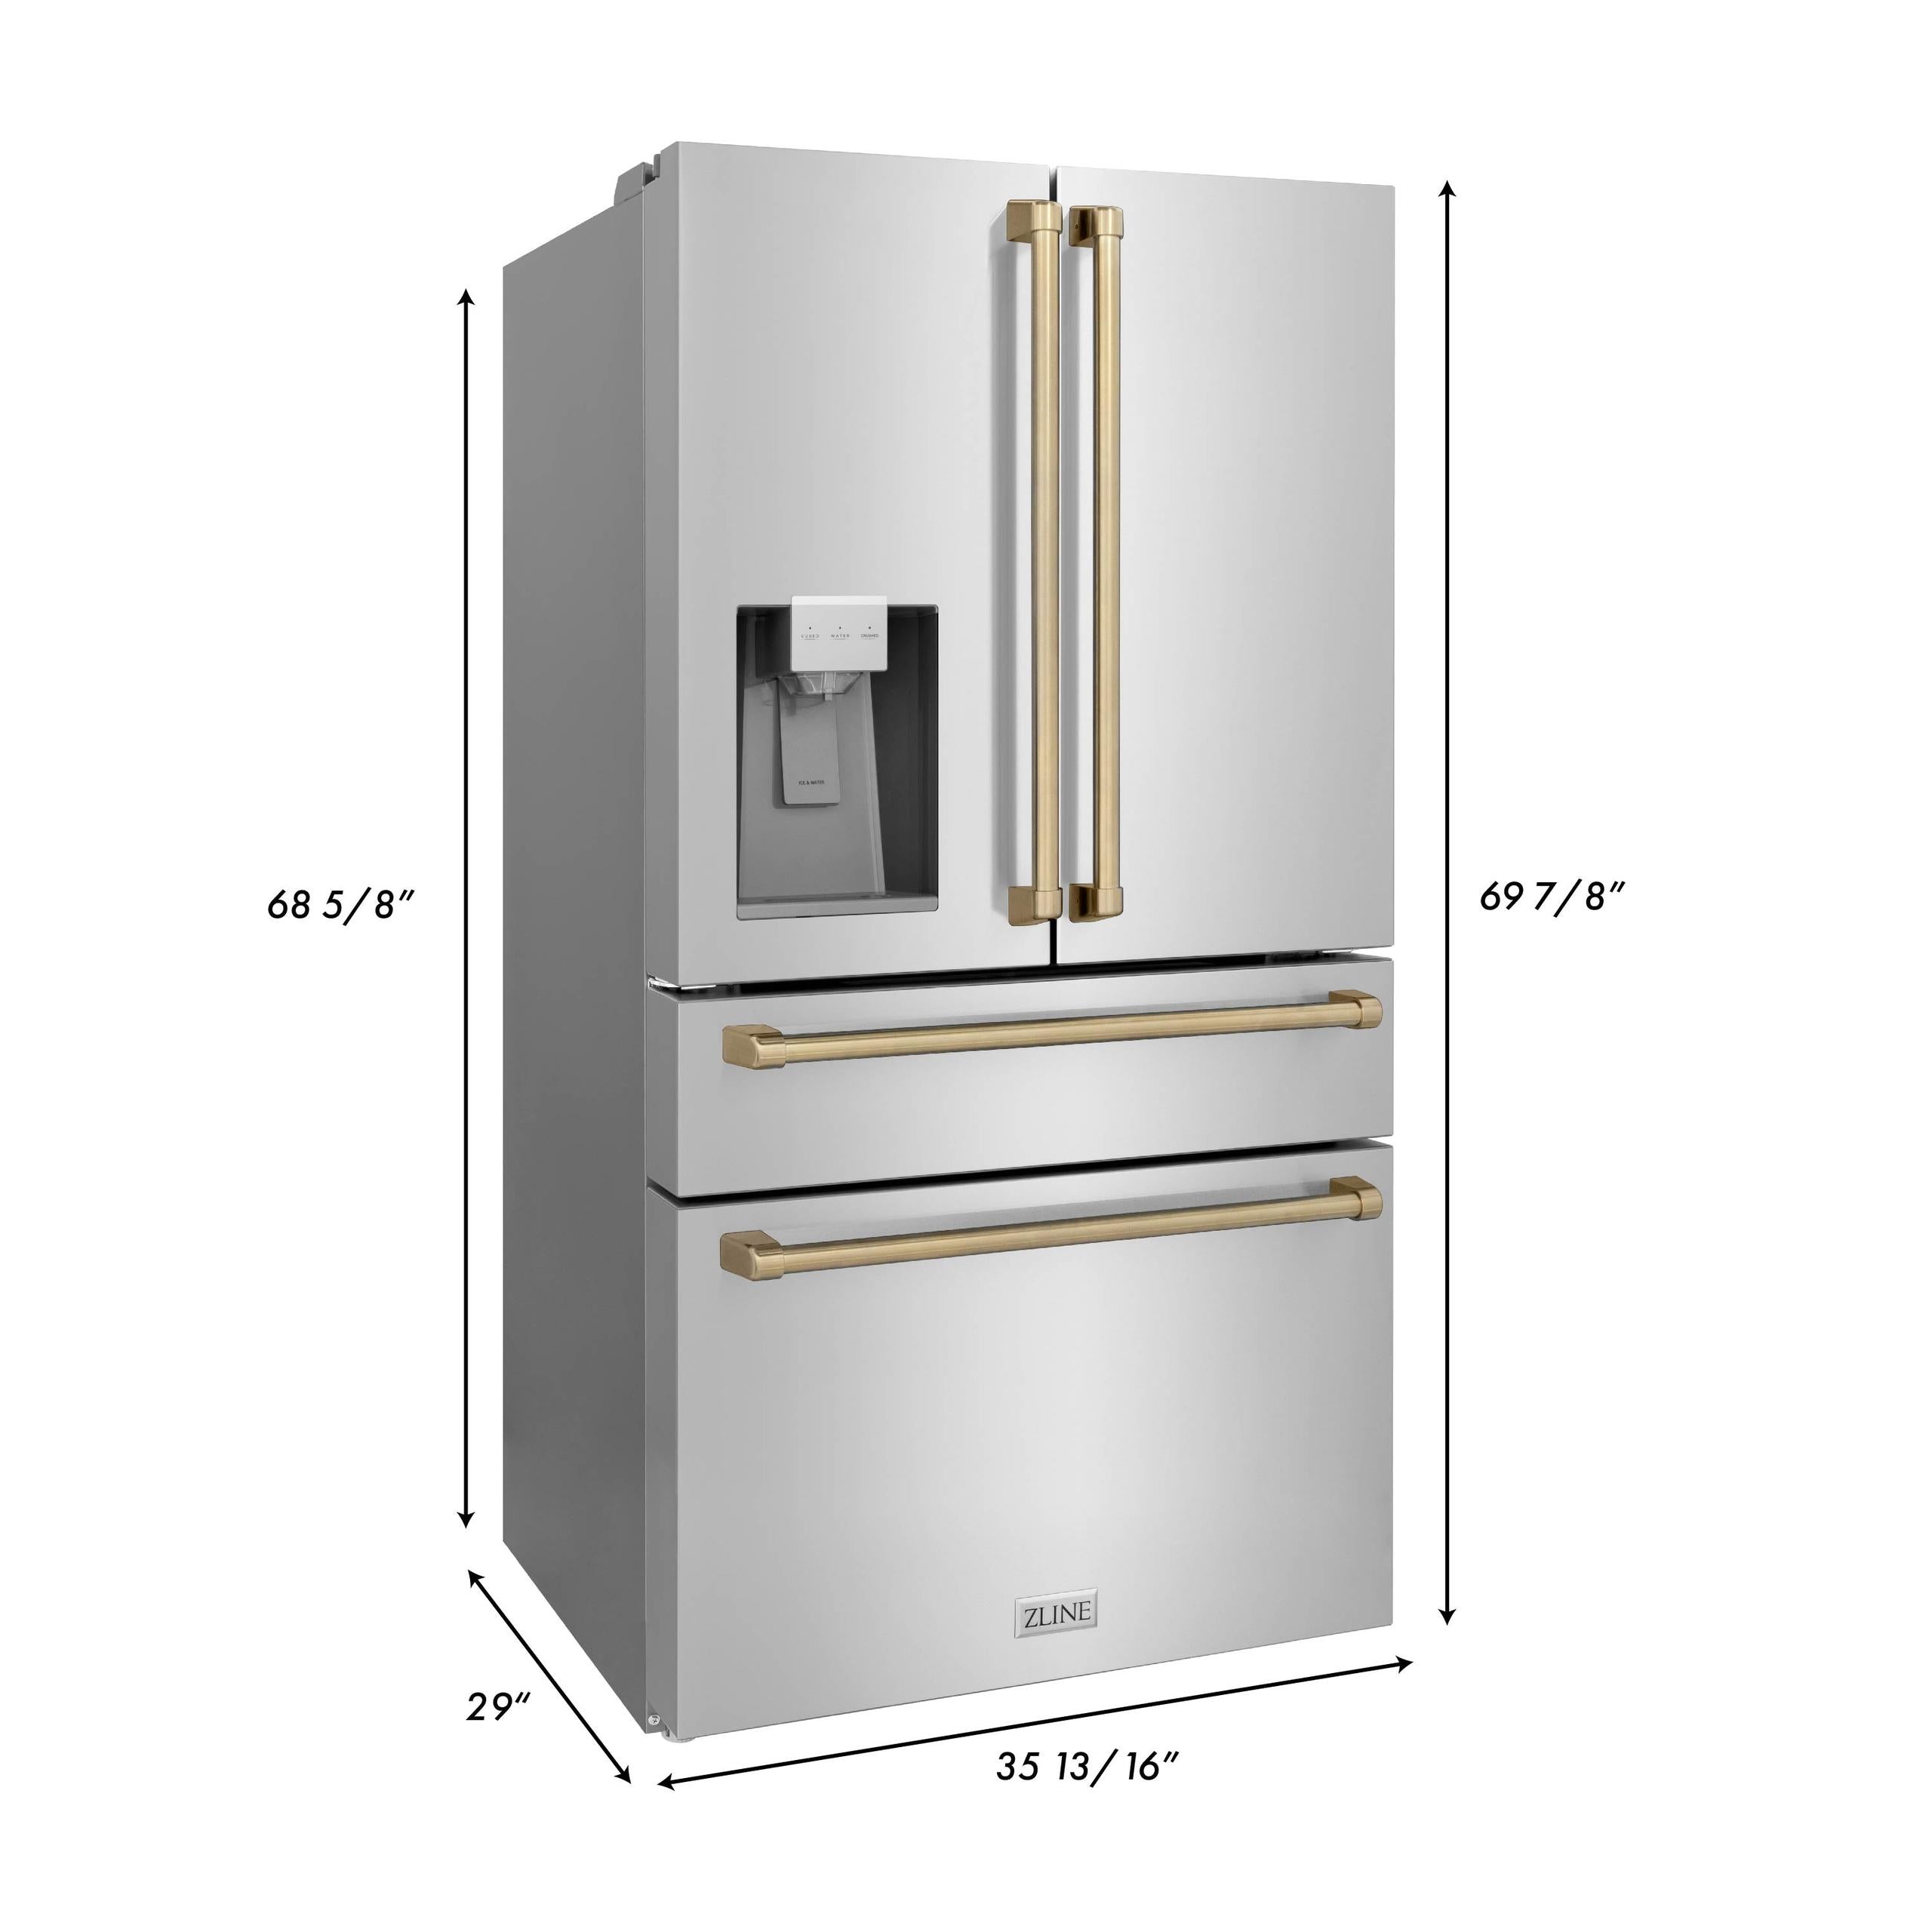 ZLINE KITCHEN AND BATH RFMZW36G ZLINE 36" Autograph Edition 21.6 cu. ft Freestanding French Door Refrigerator with Water and Ice Dispenser in Fingerprint Resistant Stainless Steel with Accents Color: Gold